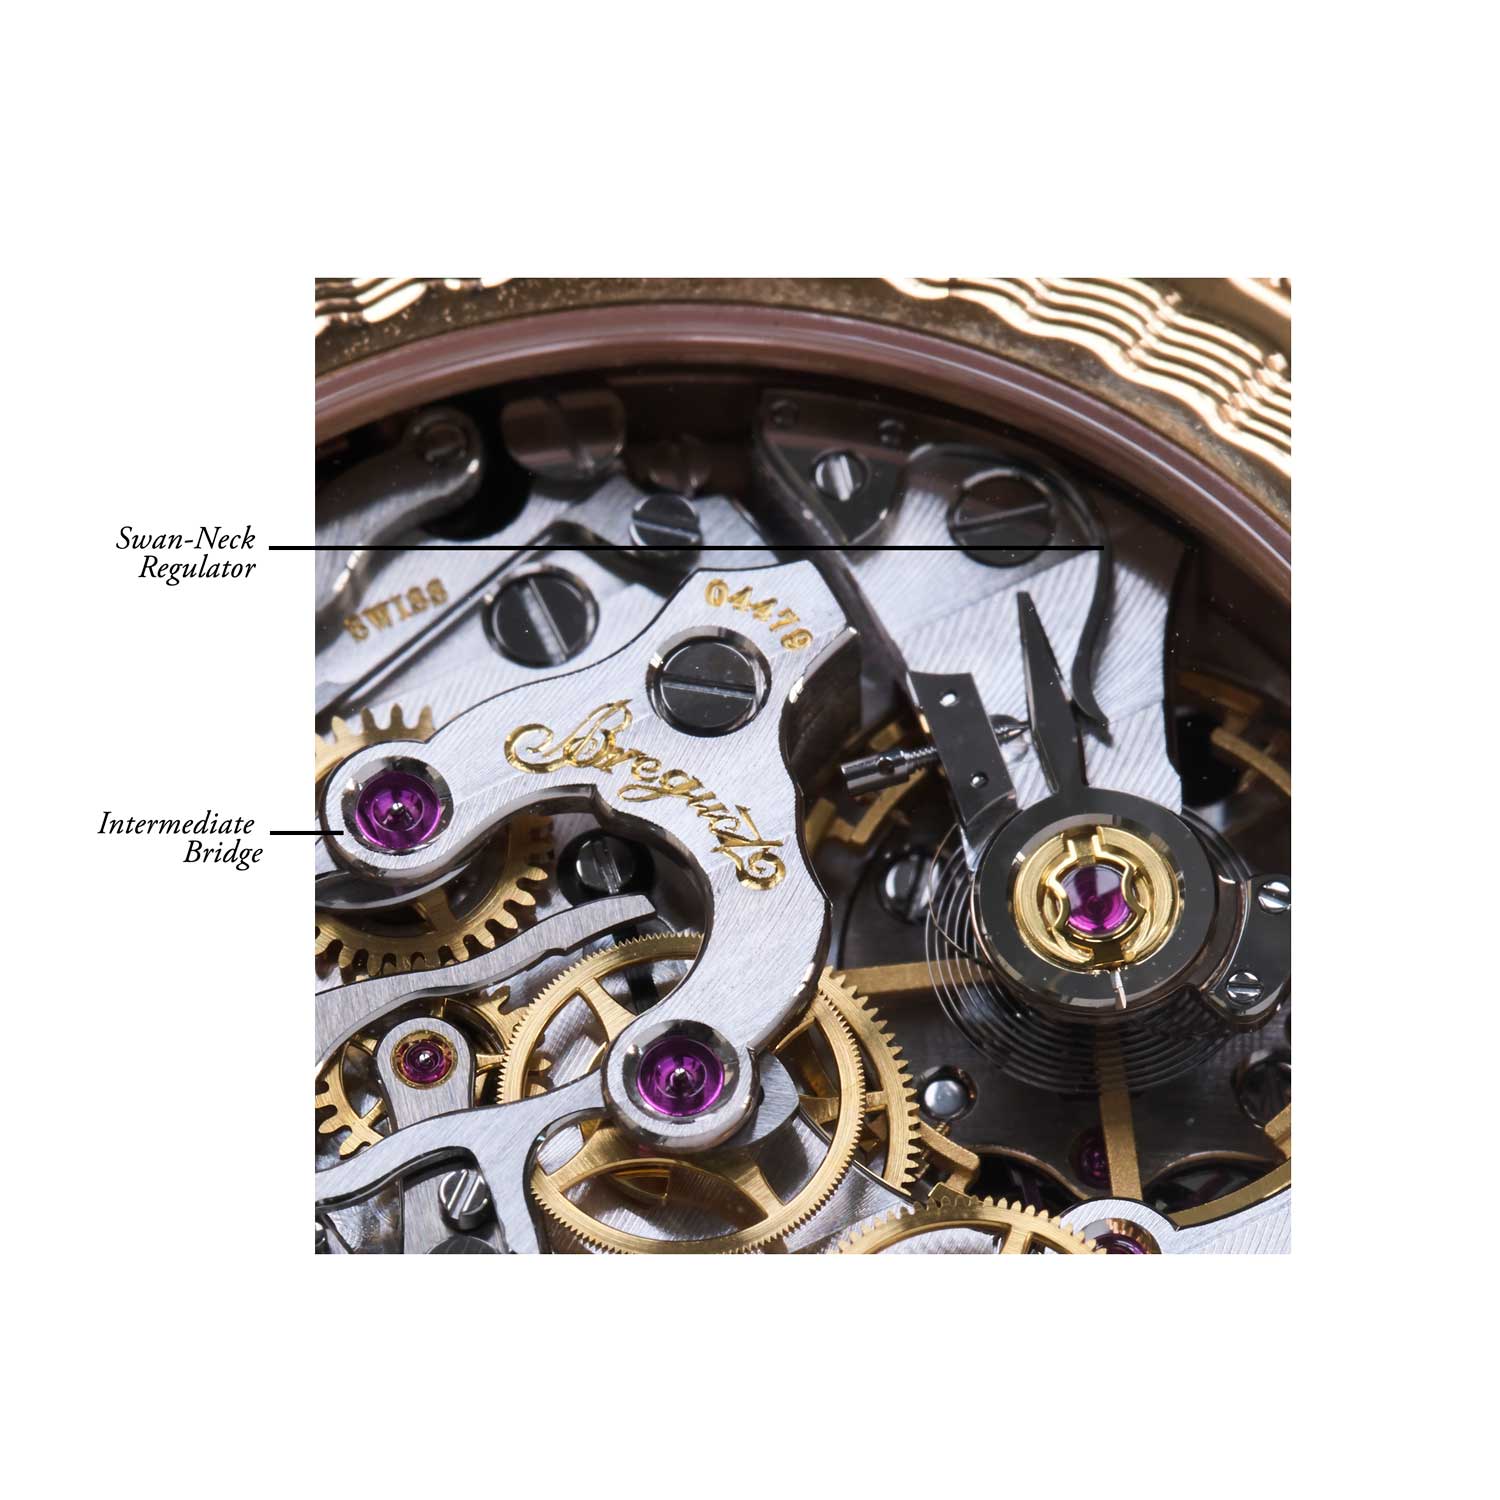 The Breguet Calibre 533,3 has a frequency of 21,600vph (3Hz), sports a swan neck regulator and its intermediate bridge is a mix of a U and Y (©Revolution)